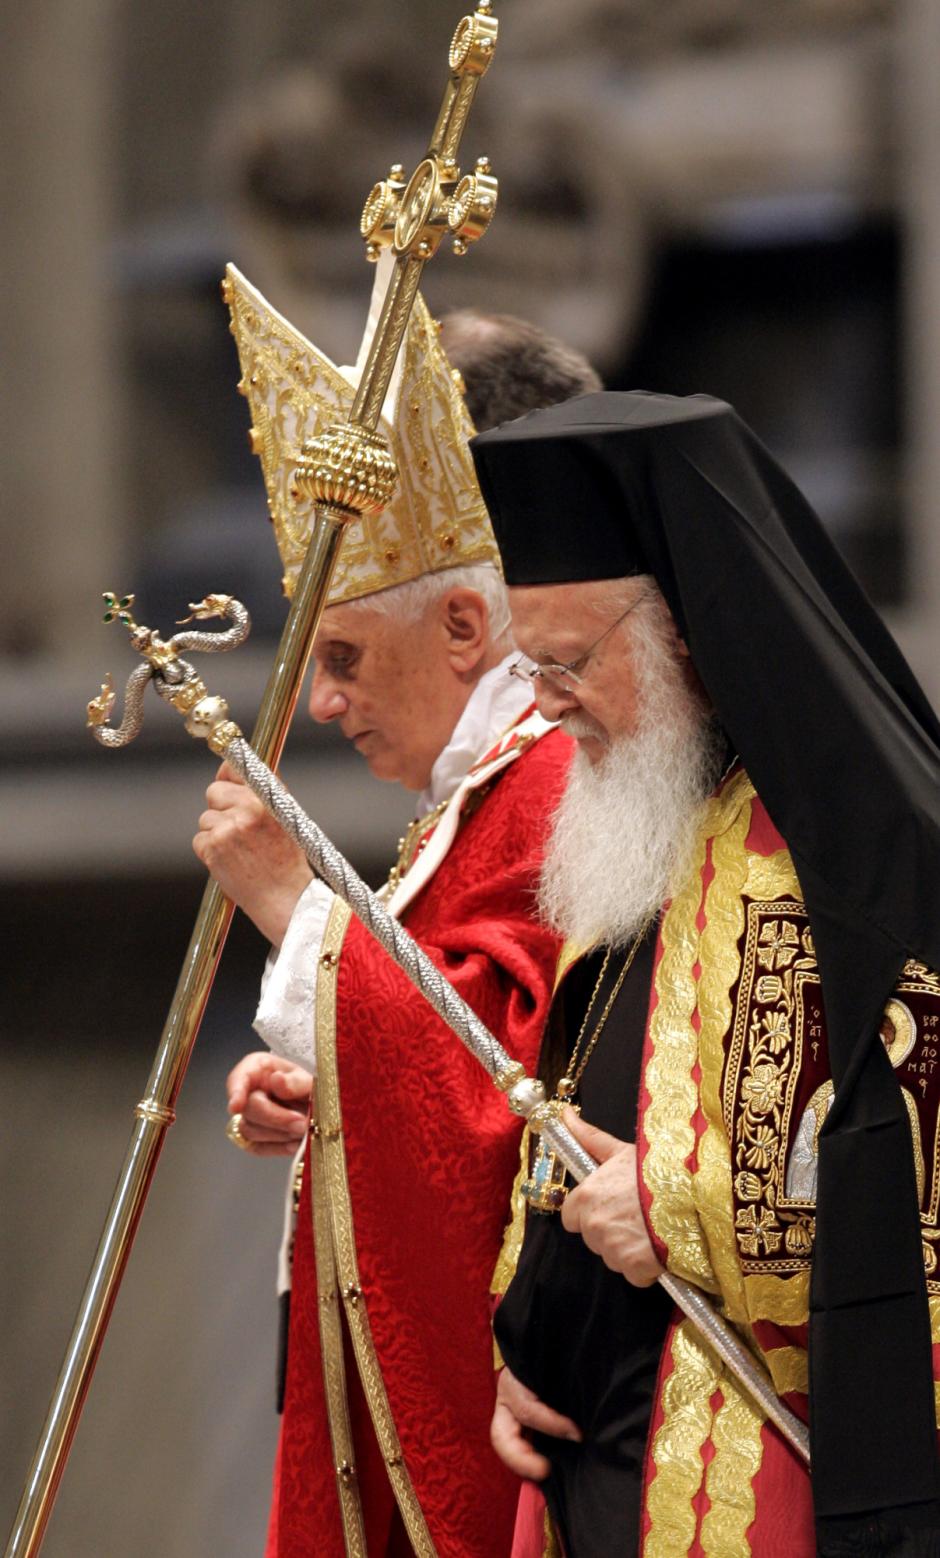 Pope Benedict XVI and Ecumenical Patriarch Bartholomew hold their staffs as they walk during a Mass celebrated in St. Peter's Basilica, Sunday, June 29, 2008. The Mass marking the feast of St. Peter and St. Paul esi:included readings from the Gospels in Latin and Greek by Catholic and Orthodox clerics. Benedict and Bartholomew also prayed together in Greek. (AP Photo/Pier Paolo Cito)